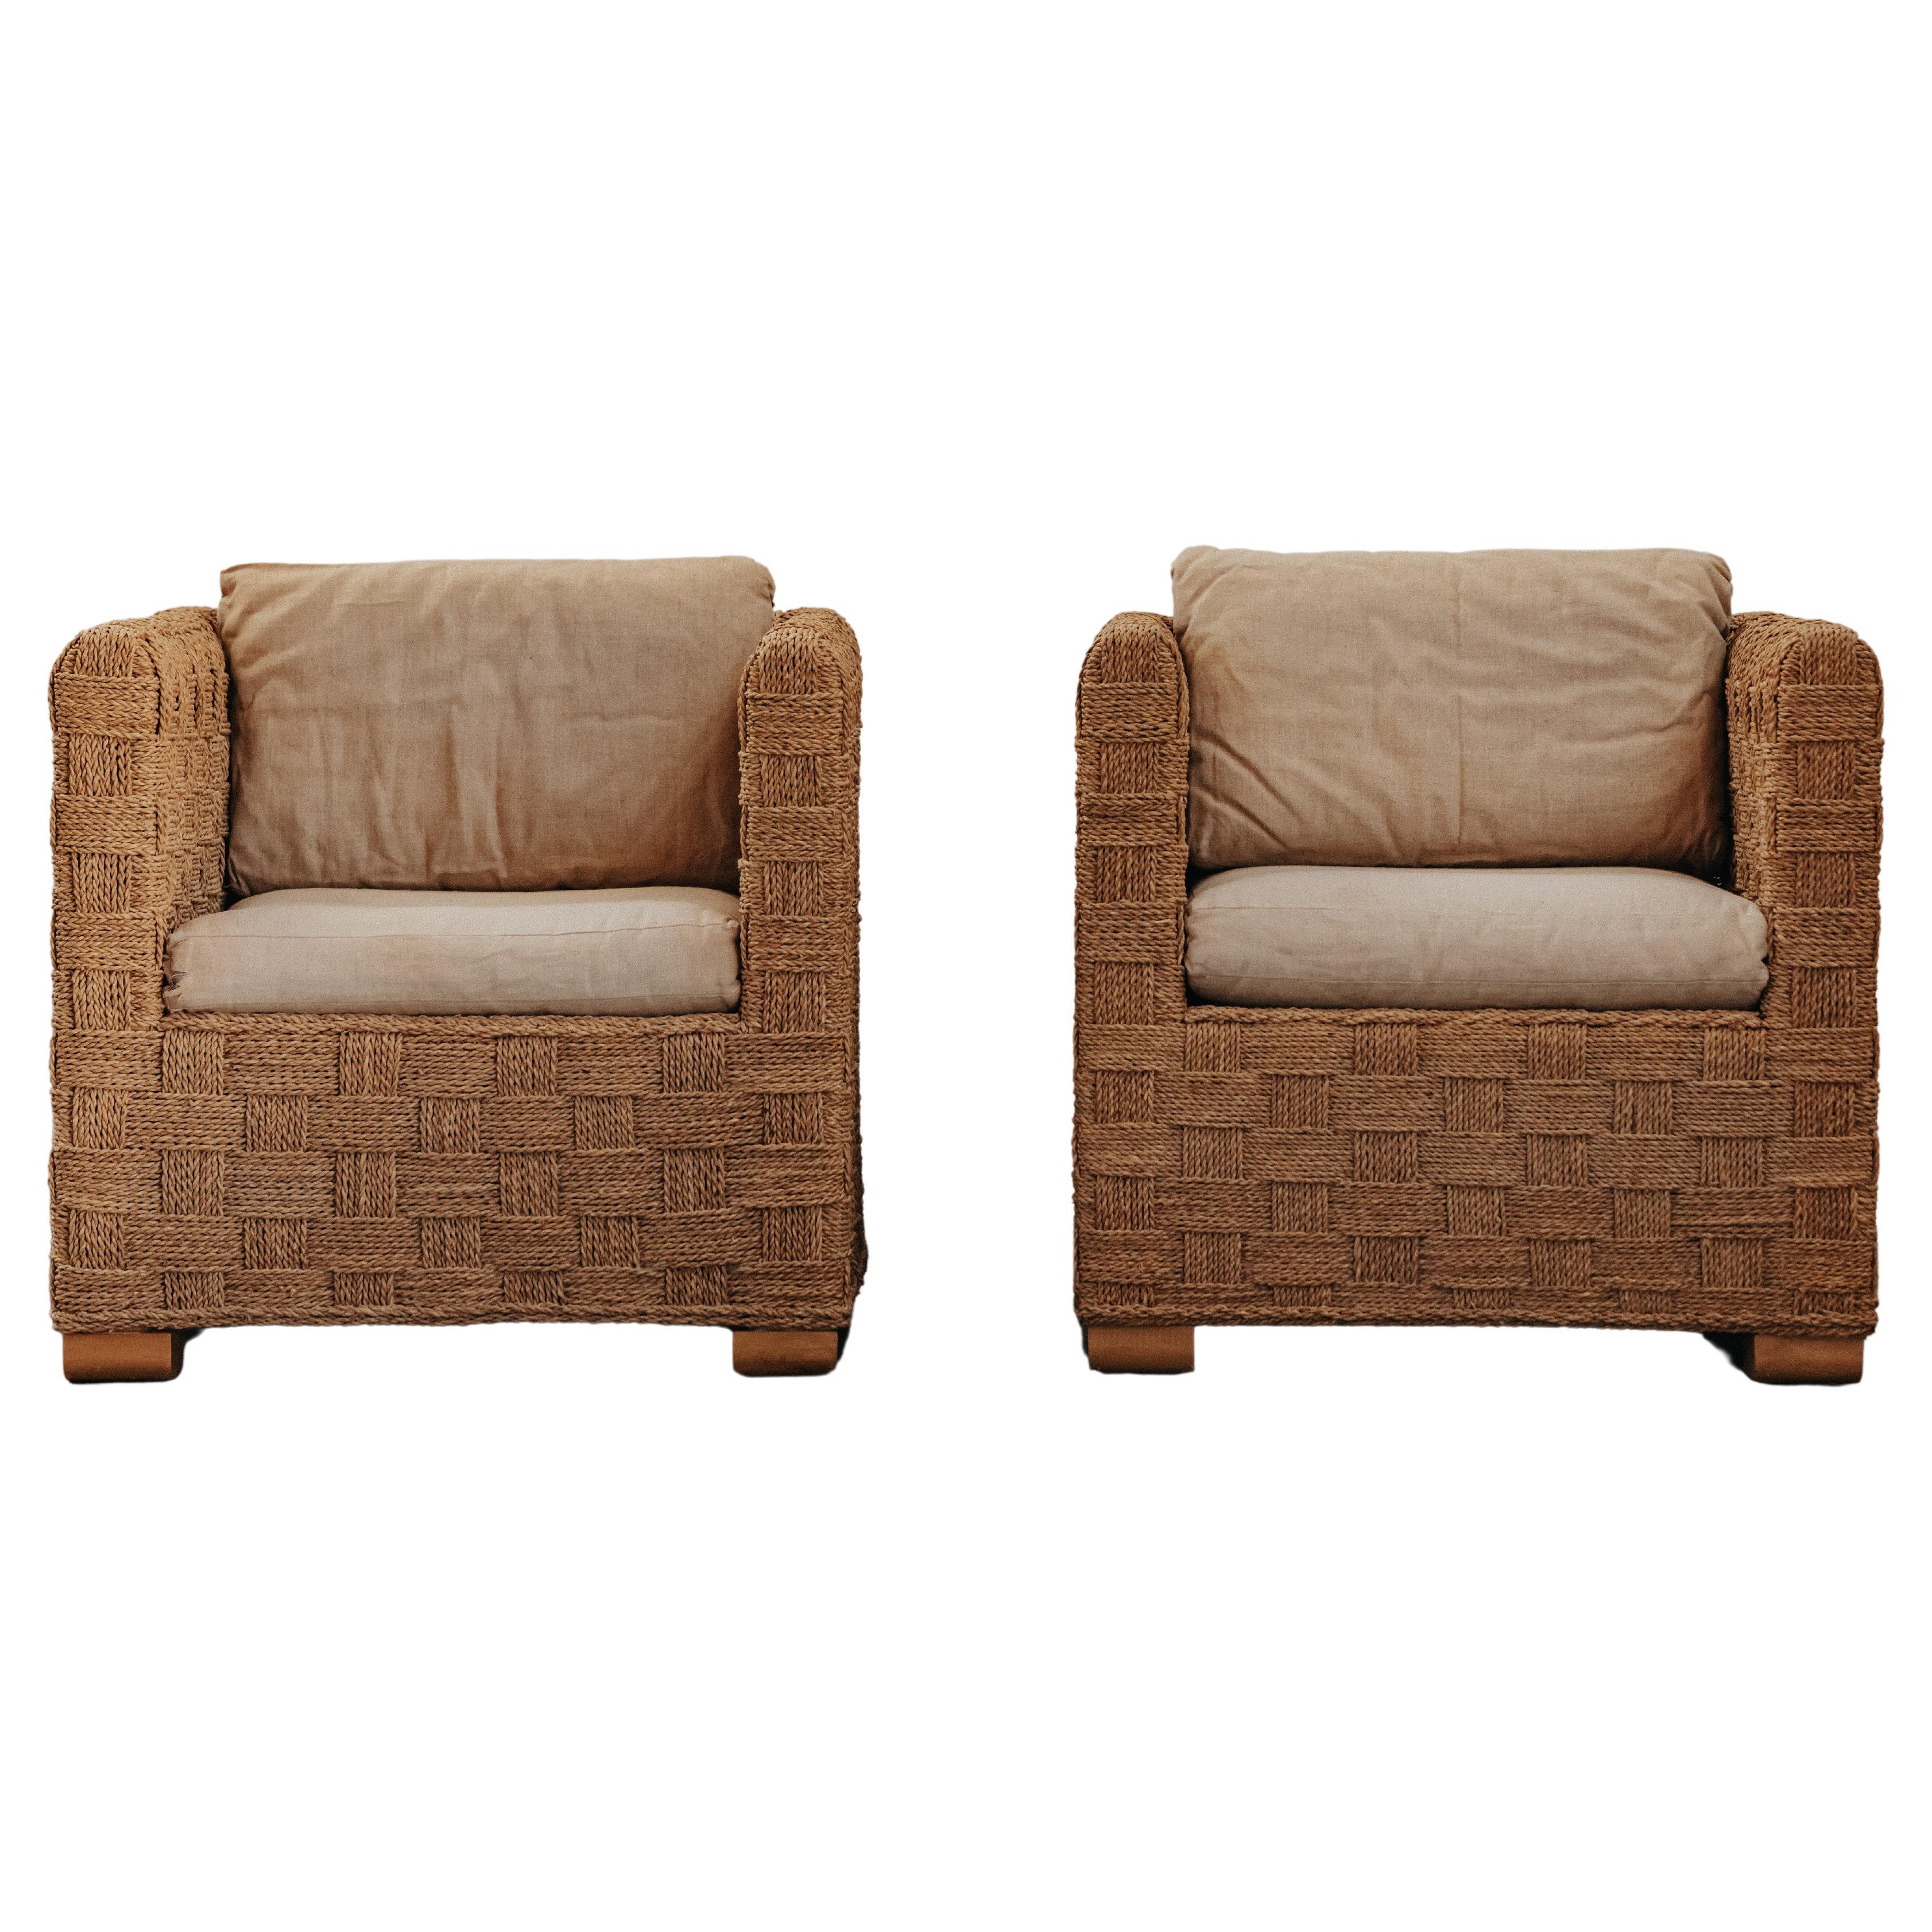 Vintage Pair Of Woven Lounge Chairs From France, Circa 1970